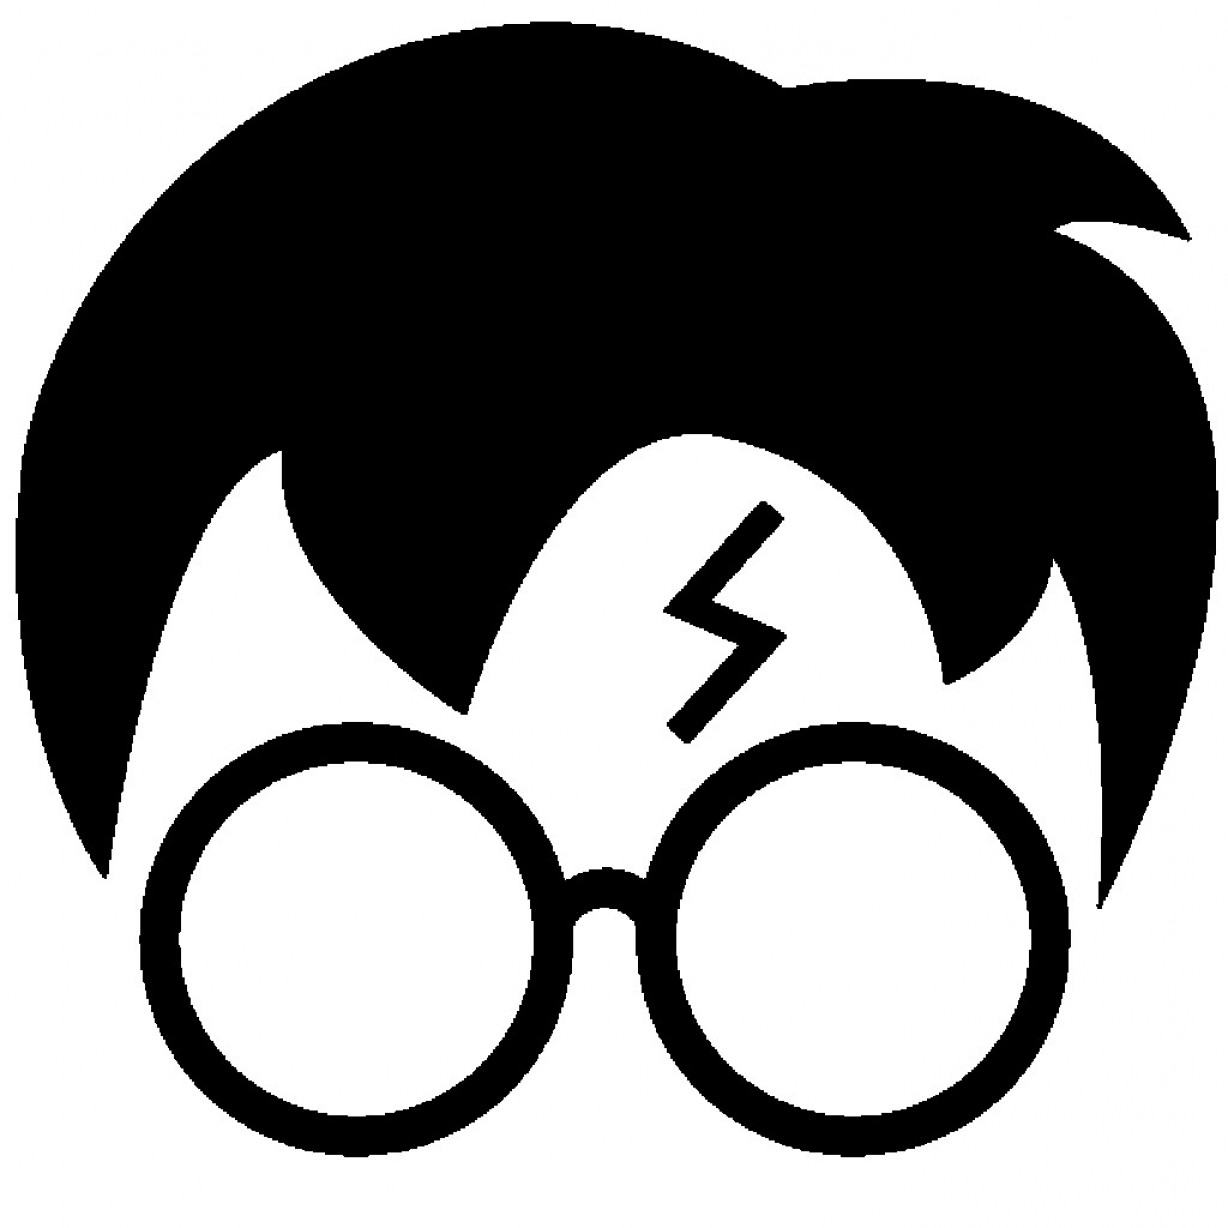 Harry Potter Silhouette Clipart.